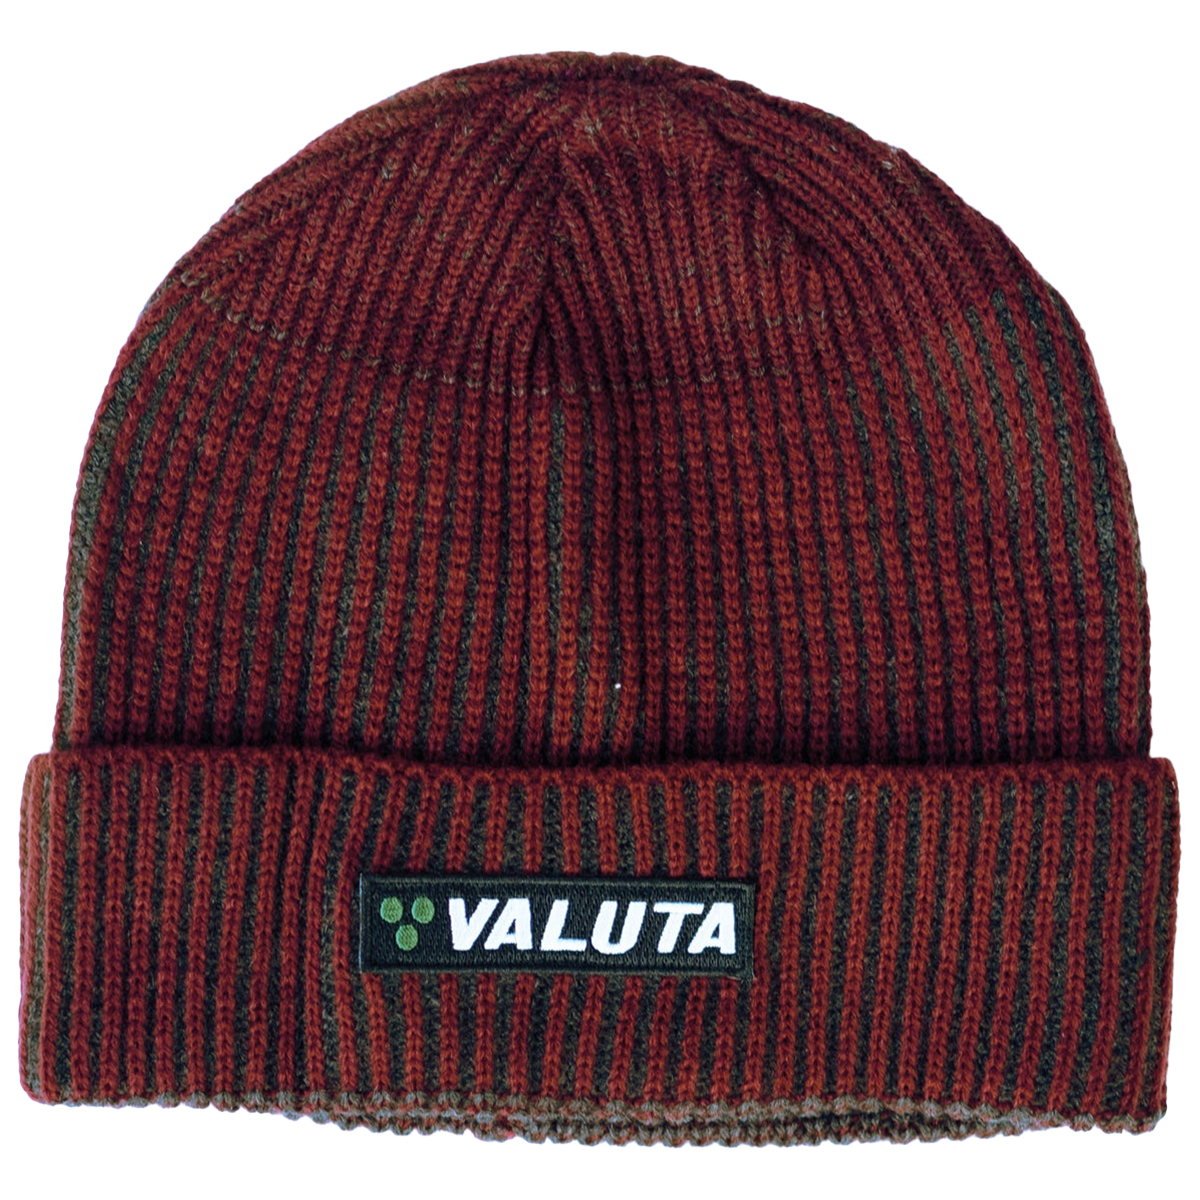 Valuta Comfy Beanie Red